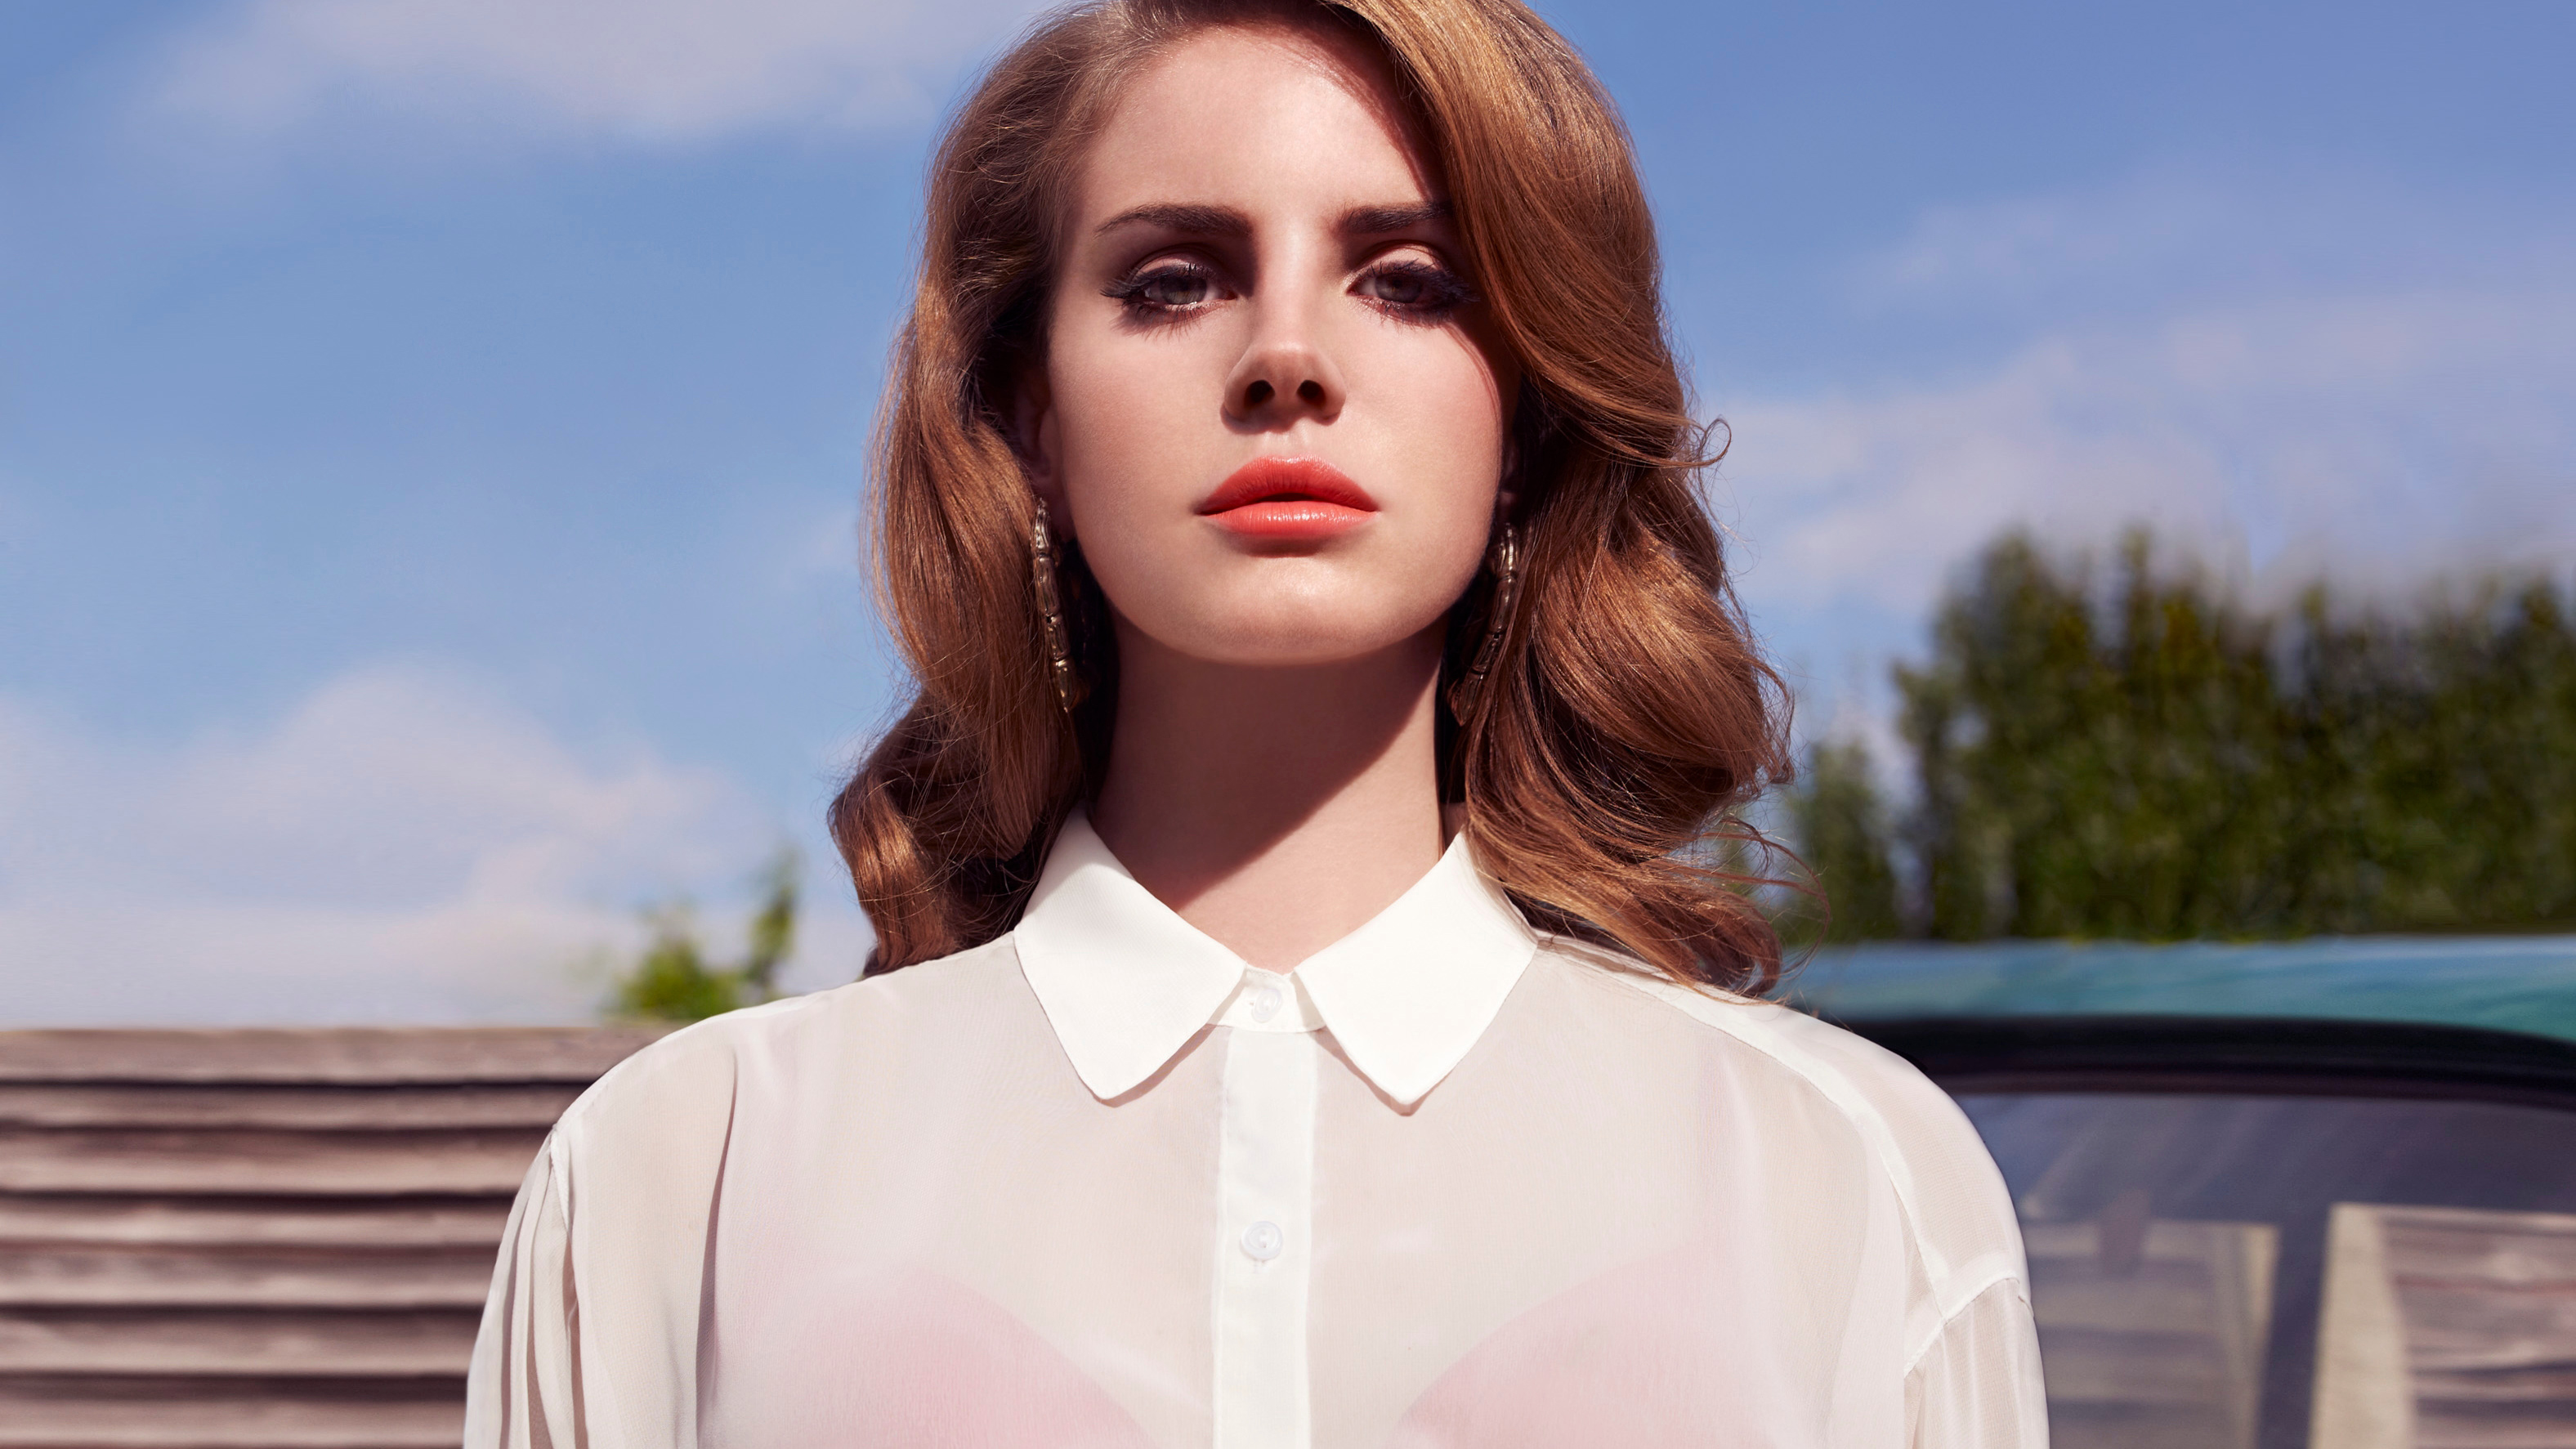 Lana Del Rey HD Wallpapers and Backgrounds. 